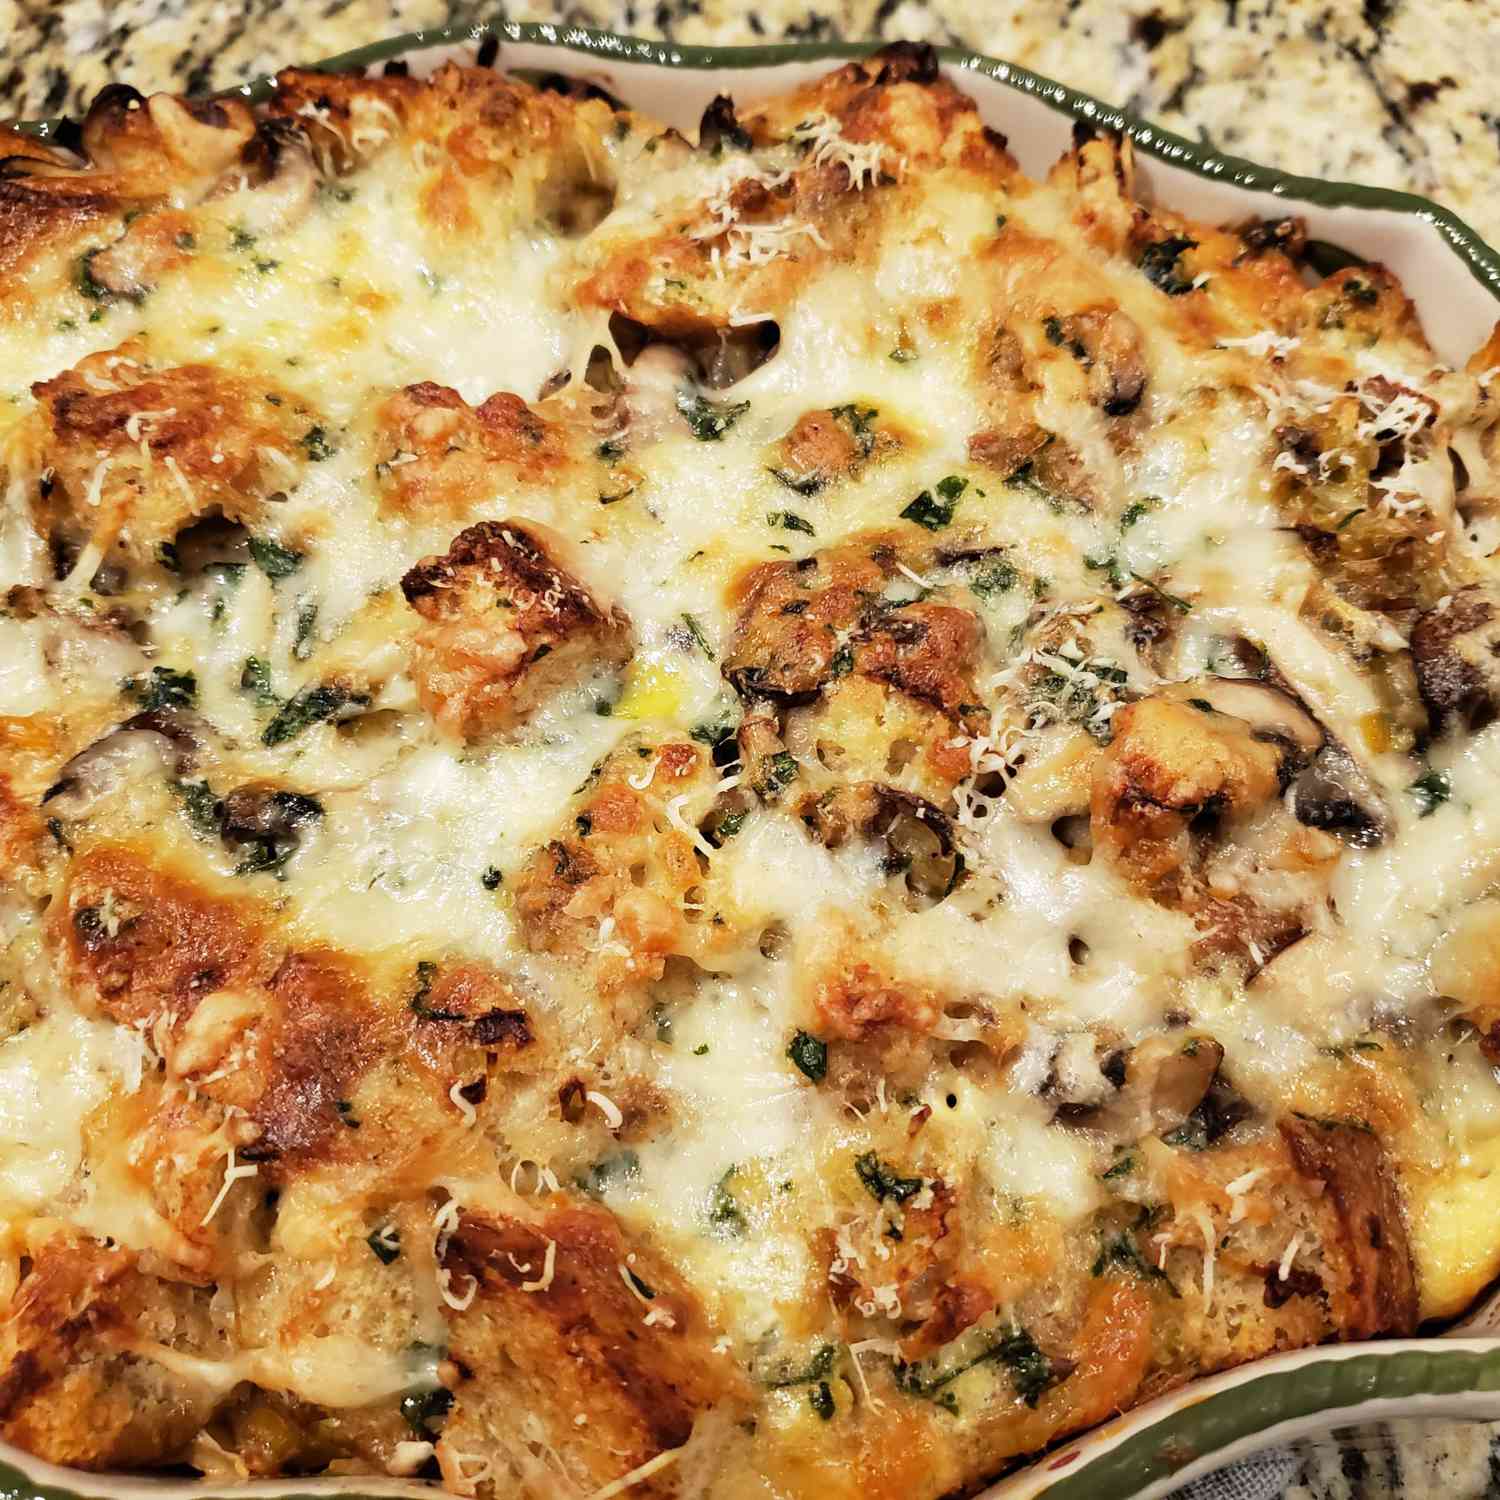 Savory Bread Pudding with Mushrooms and Leeks